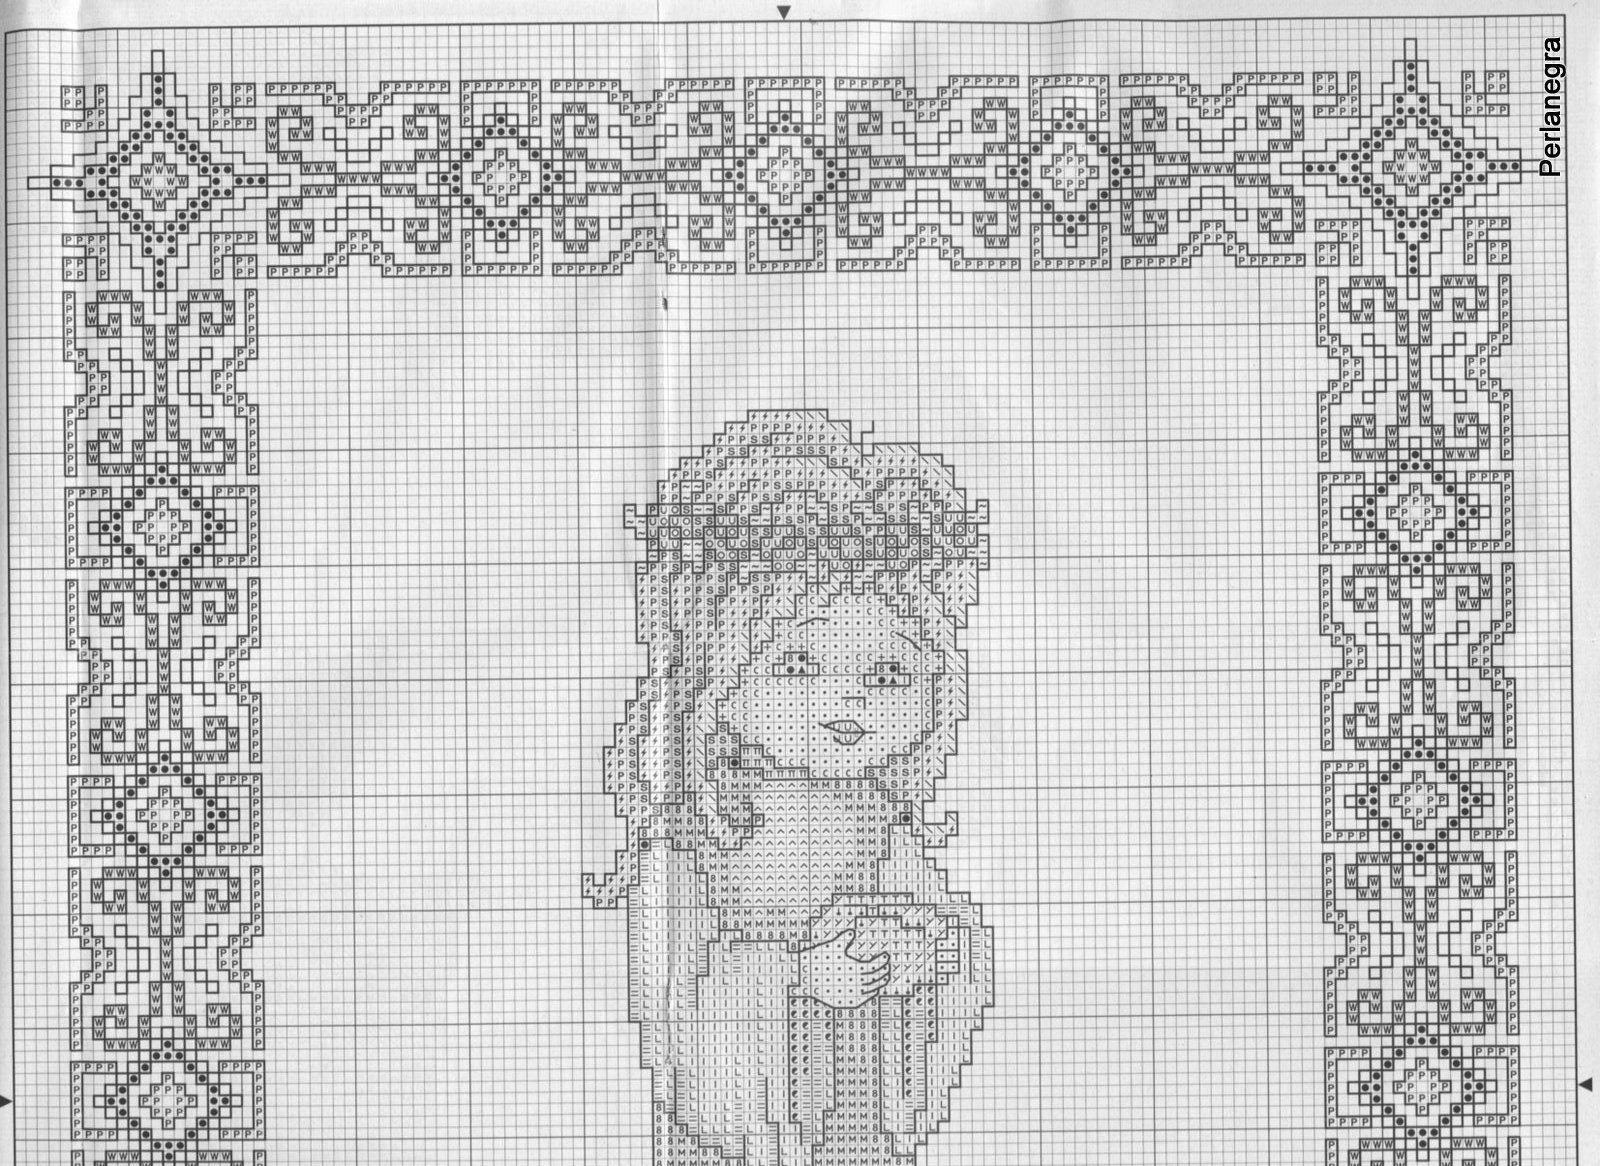 Picture of a girl cross stitch pattern (3)